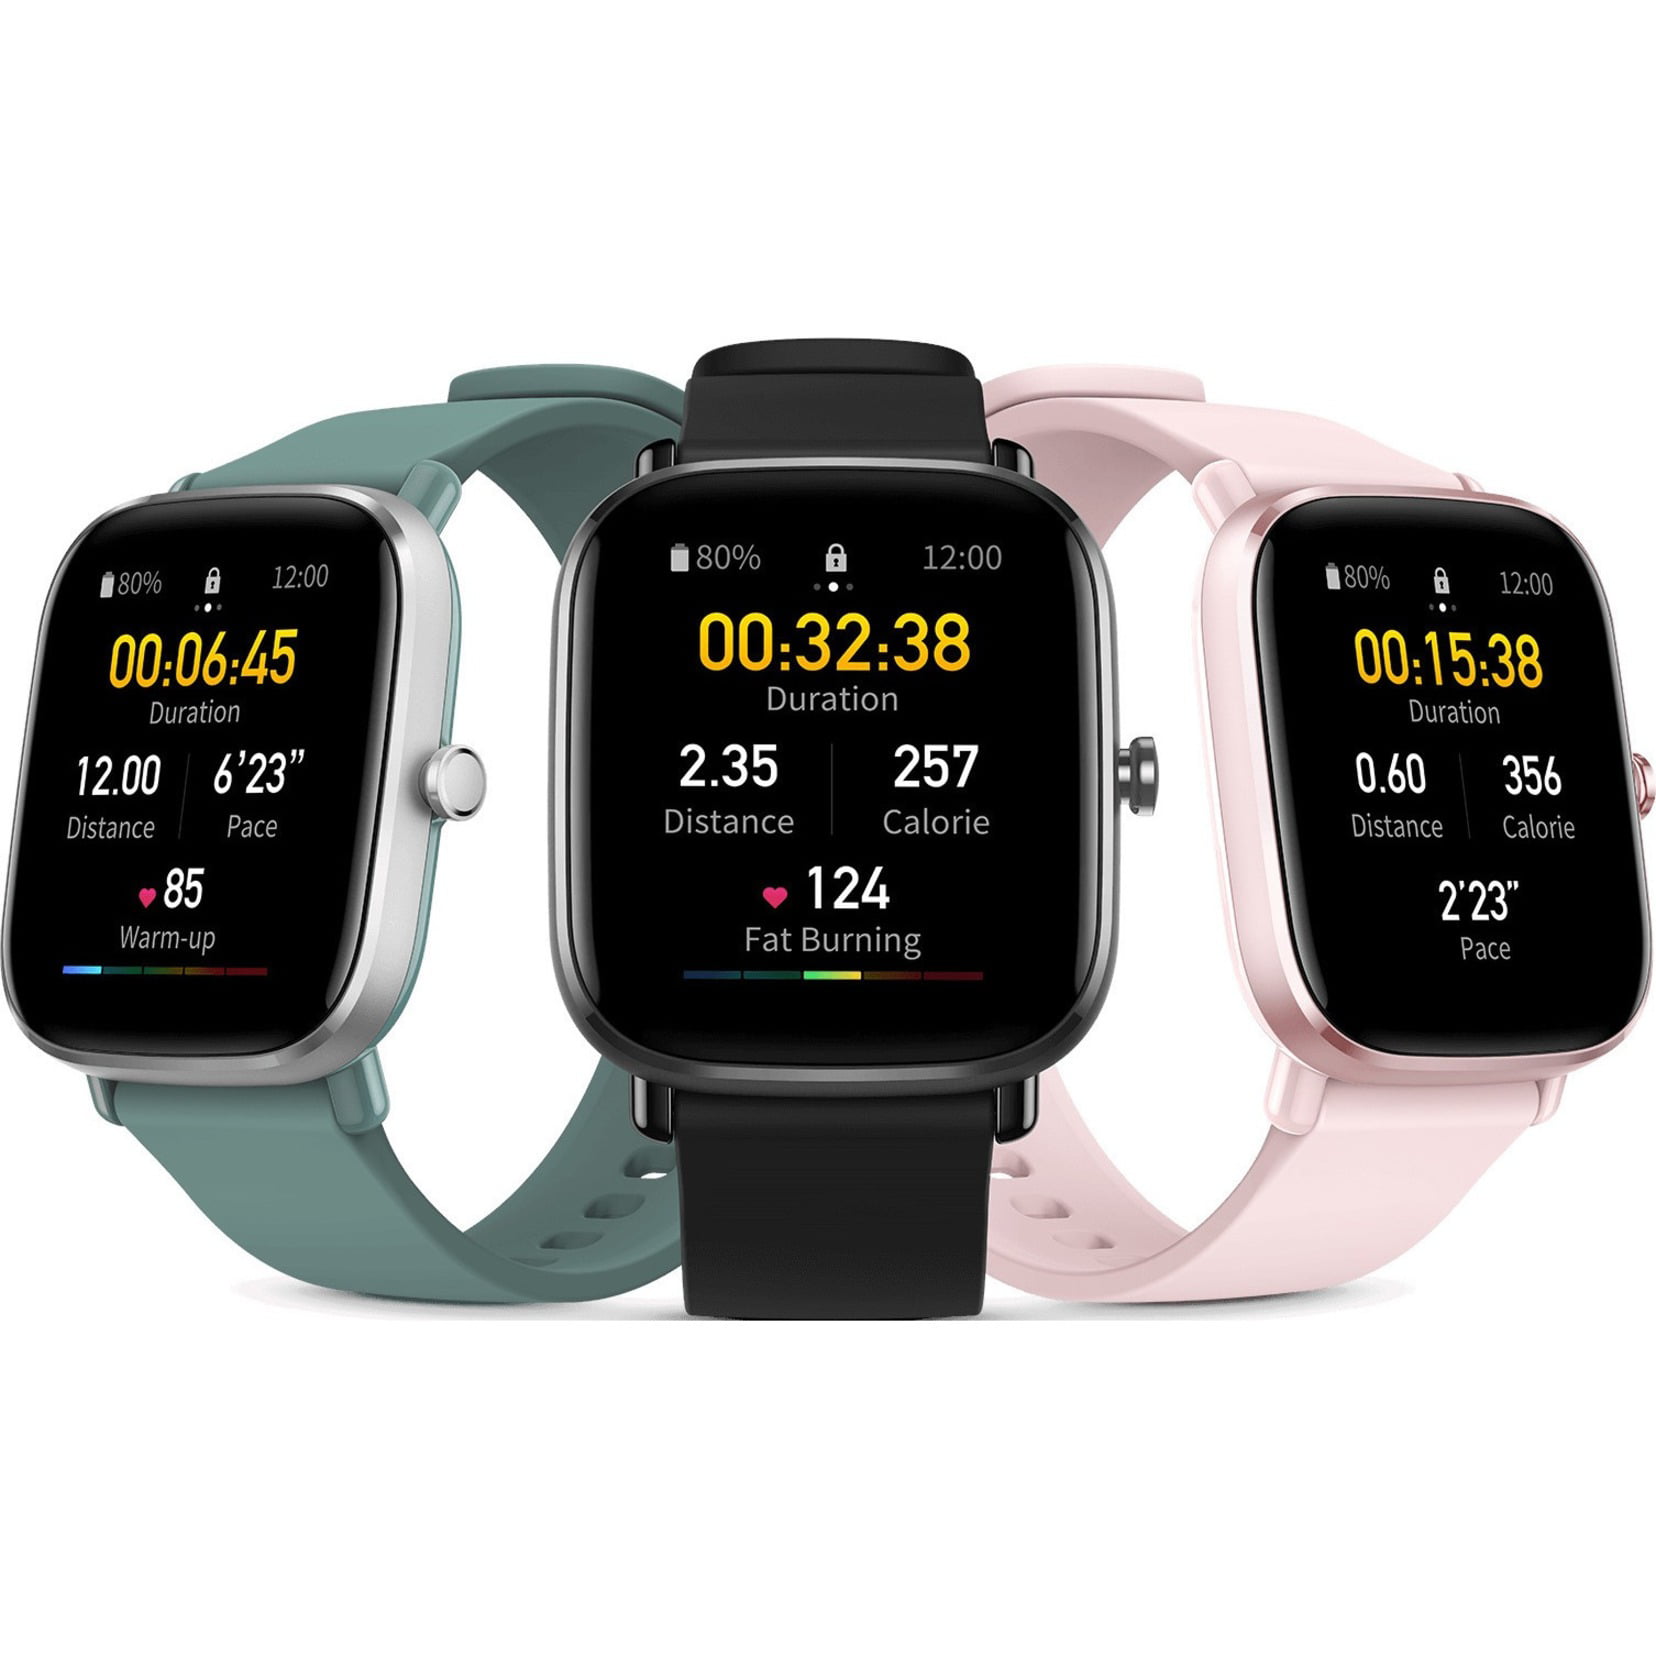 Amazfit GTS 2 Mini Smart Watch: Android & iOS Built-in GPS Fitness Tracker - 14 Battery Life - 68 Sports Mode - AMOLED Screen - Blood Oxygen Heart Rate Monitor - ATM Waterproof, Black - Walmart.com